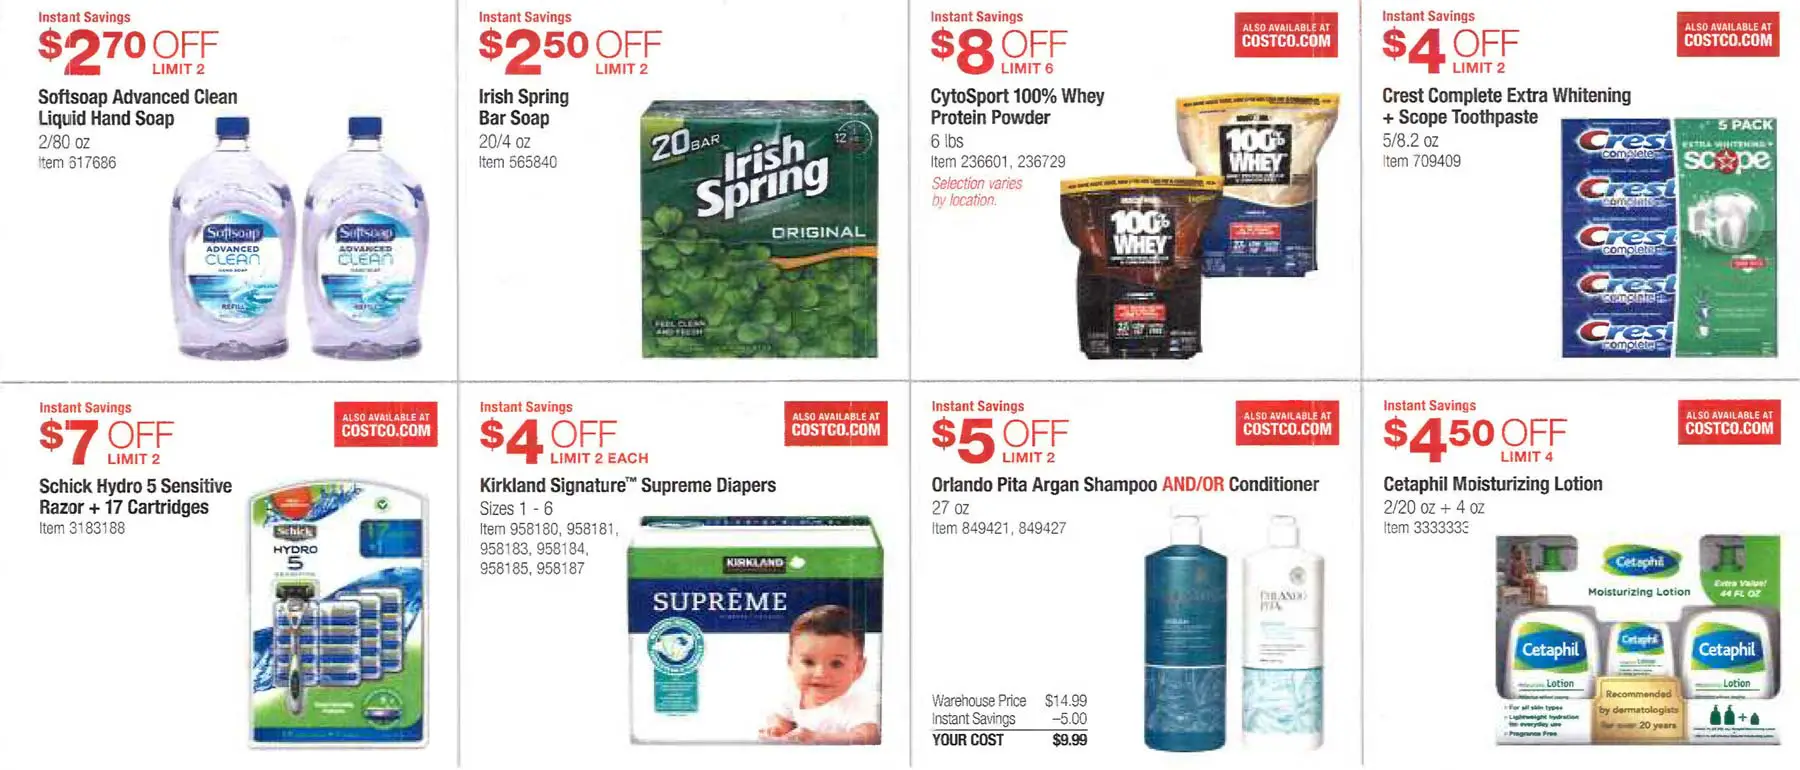 March 2016 Costco Coupon Book Page 4